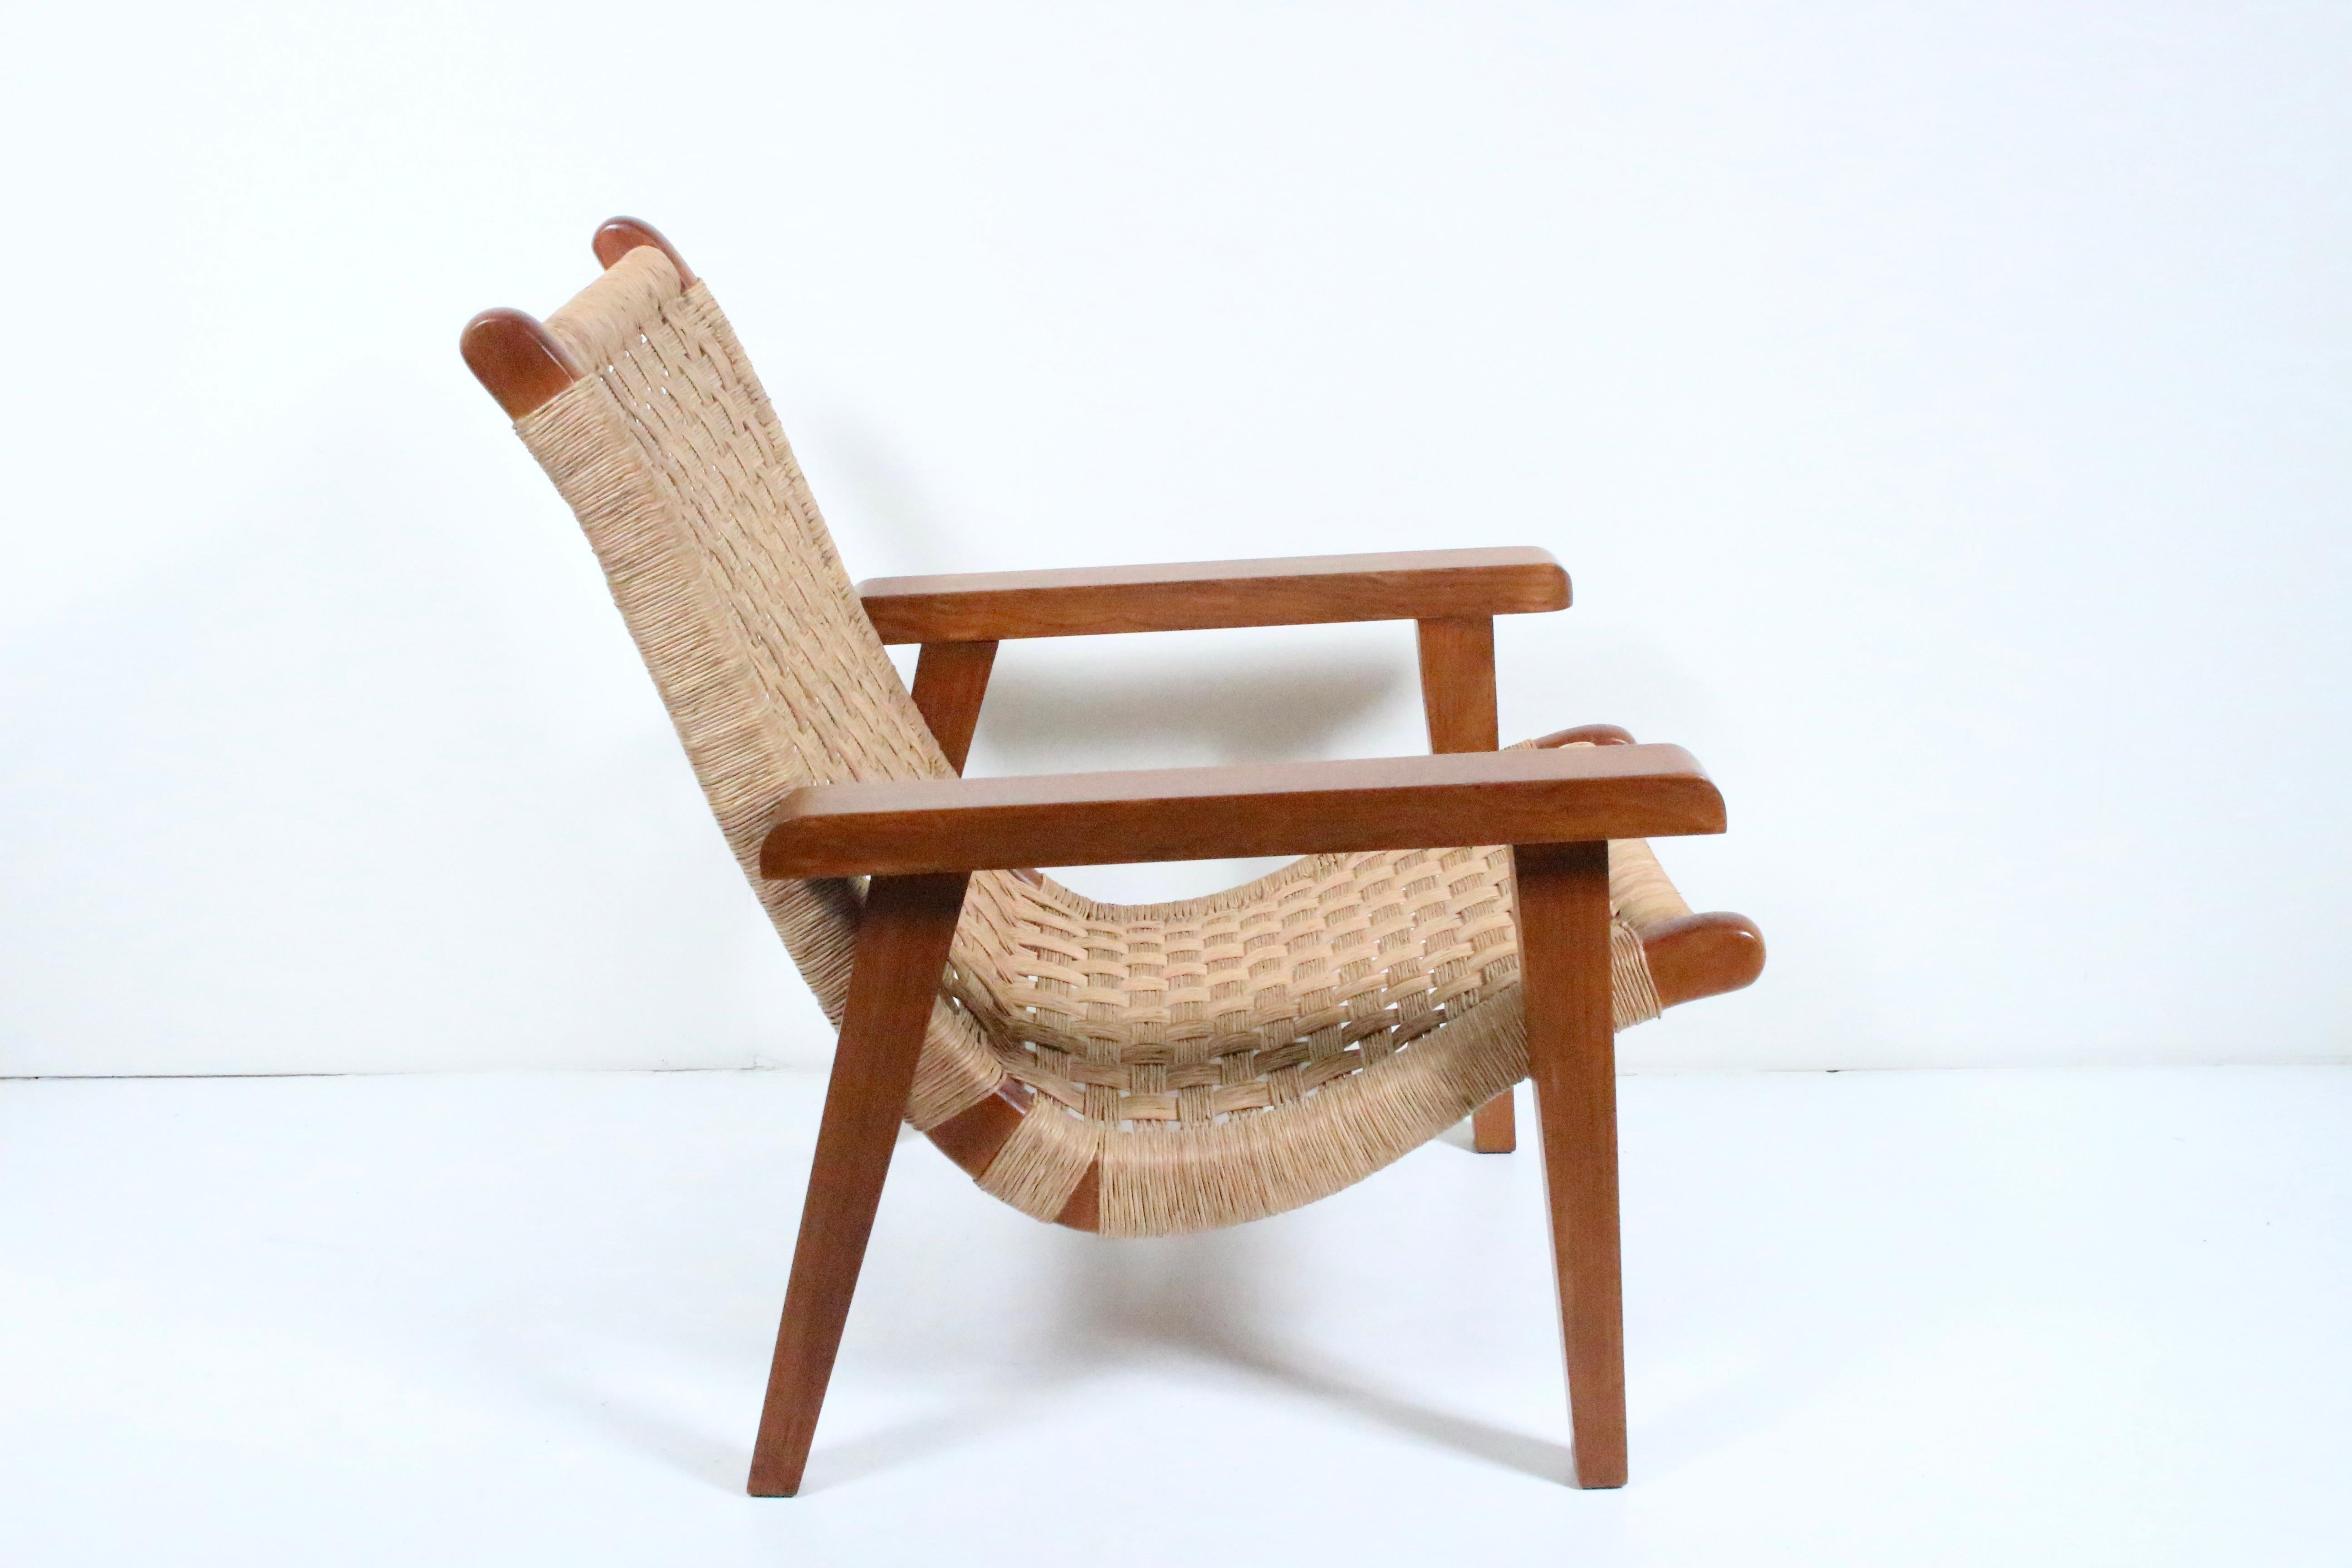 Mexican Modern Michael van Beuren teak and woven raffia lounge chair. Featuring a sturdy, functional, with comfortable two piece Teak framework, two pegs to hold the seat in place, and Raffia wrapped rounded back and seat strung in a soft